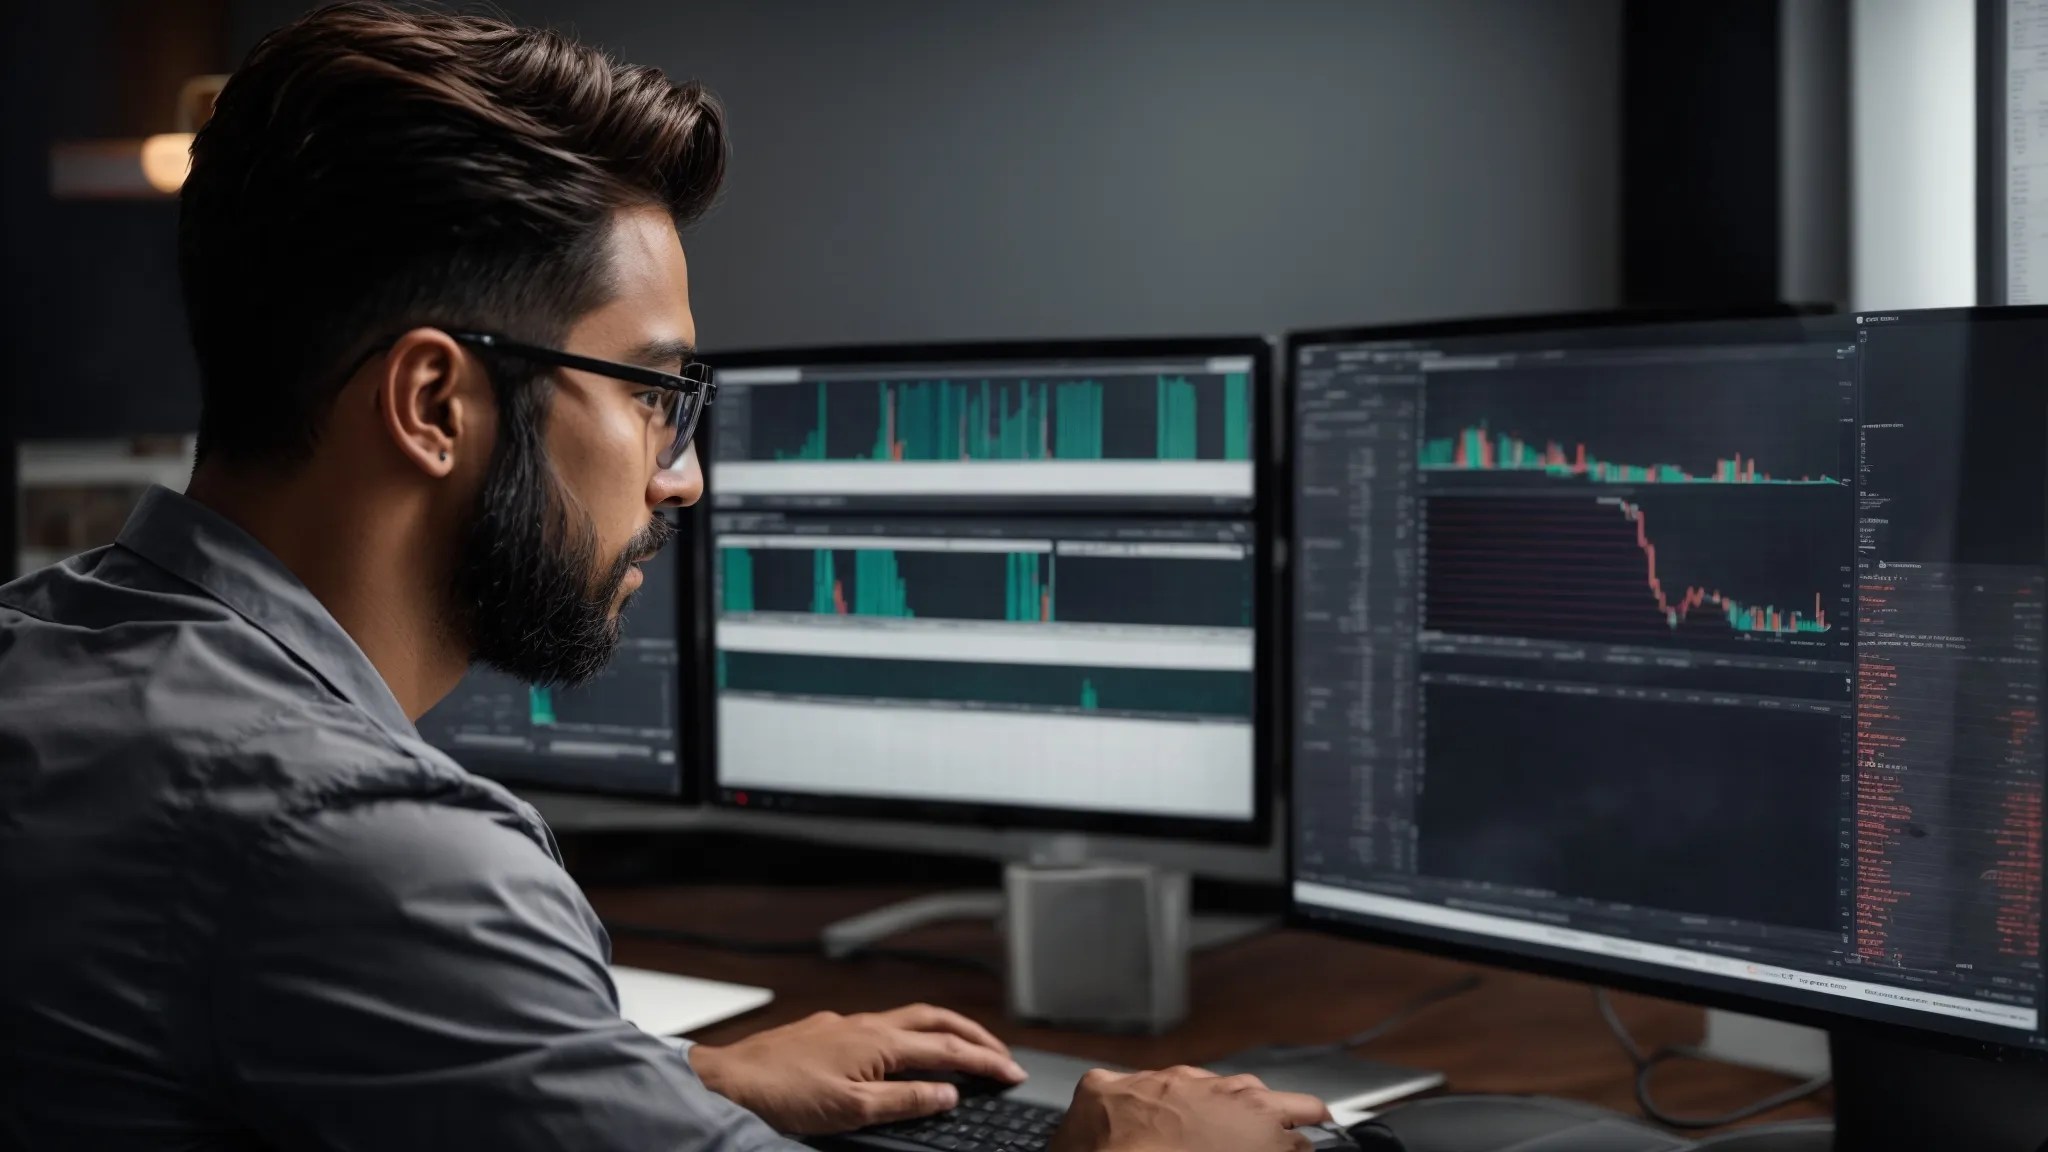 a digital marketing expert examines complex data analytics on a dual-monitor setup to refine a website's seo strategy.